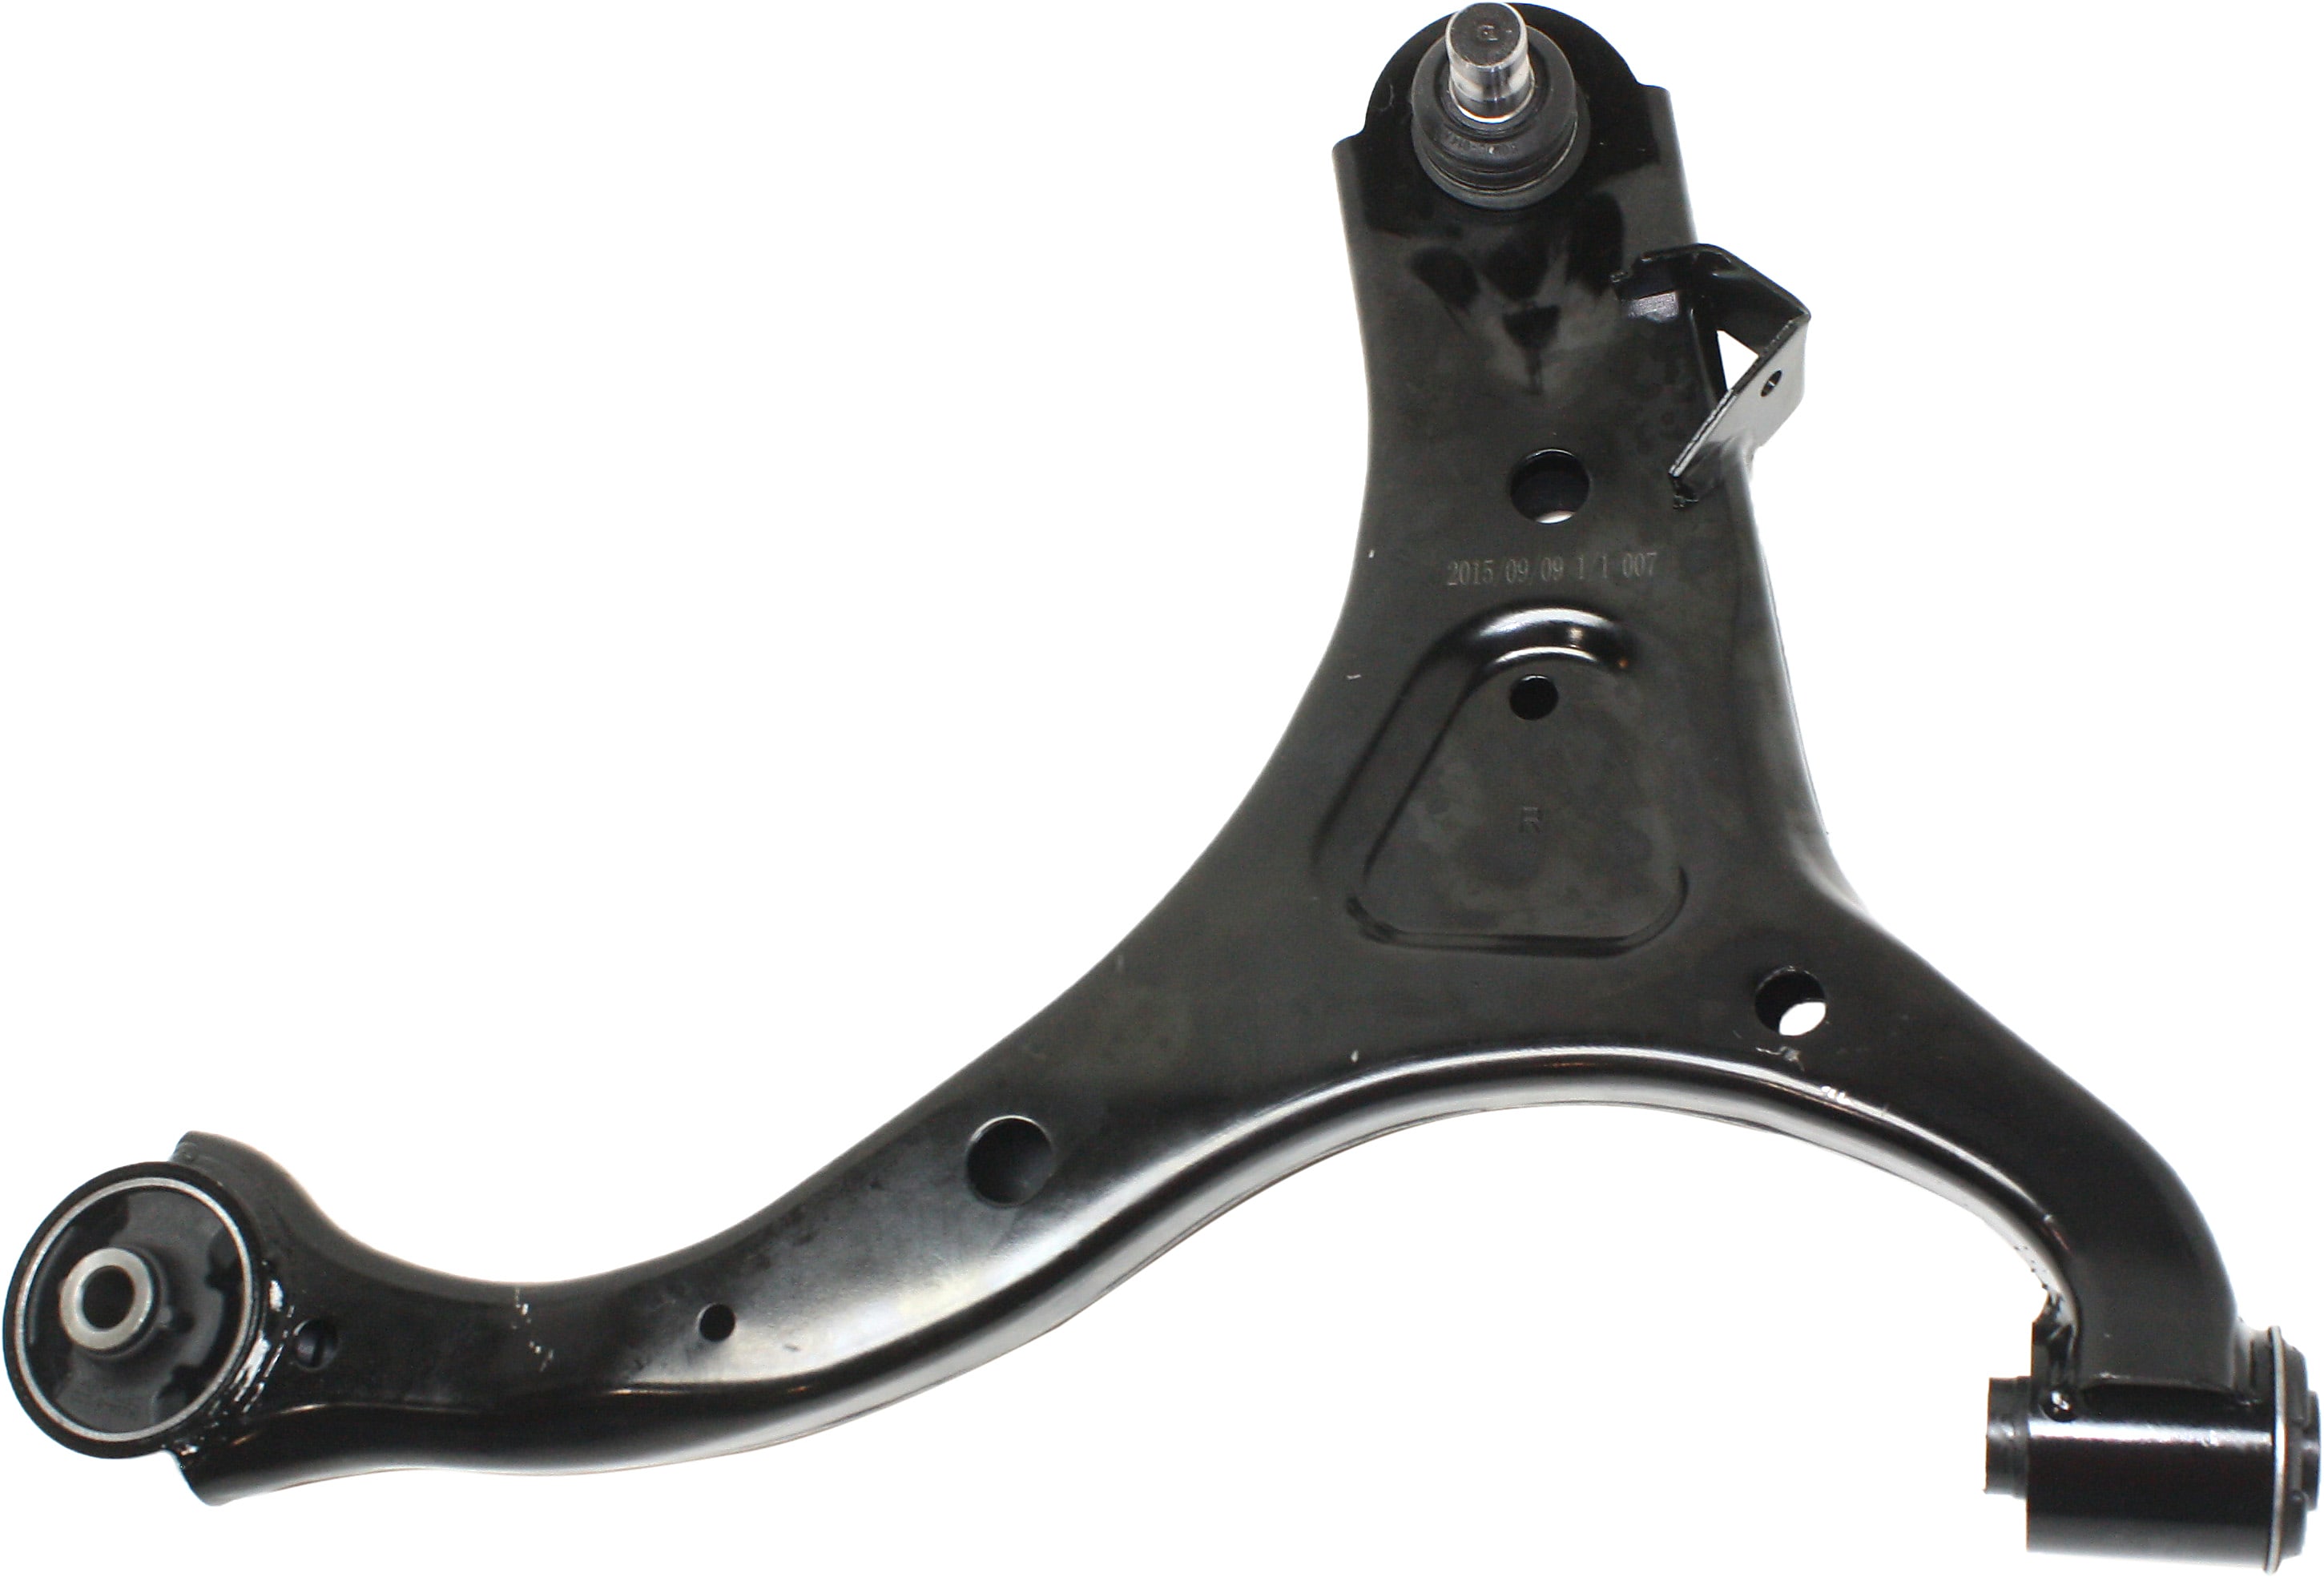 NEW LOWER CONTROL ARM FRONT RIGHT FITS 2011-2016 KIA OPTIMA 545013S200